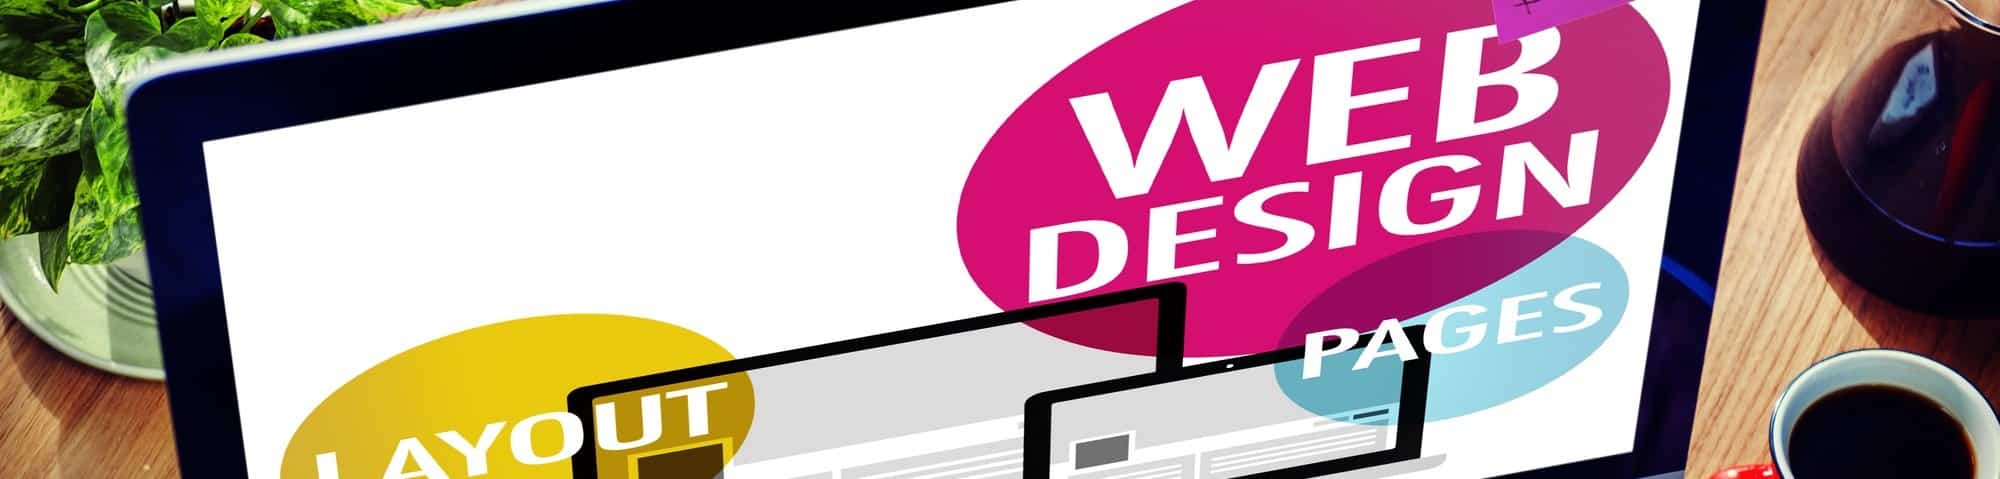 6 Website Designs To Get You Inspired